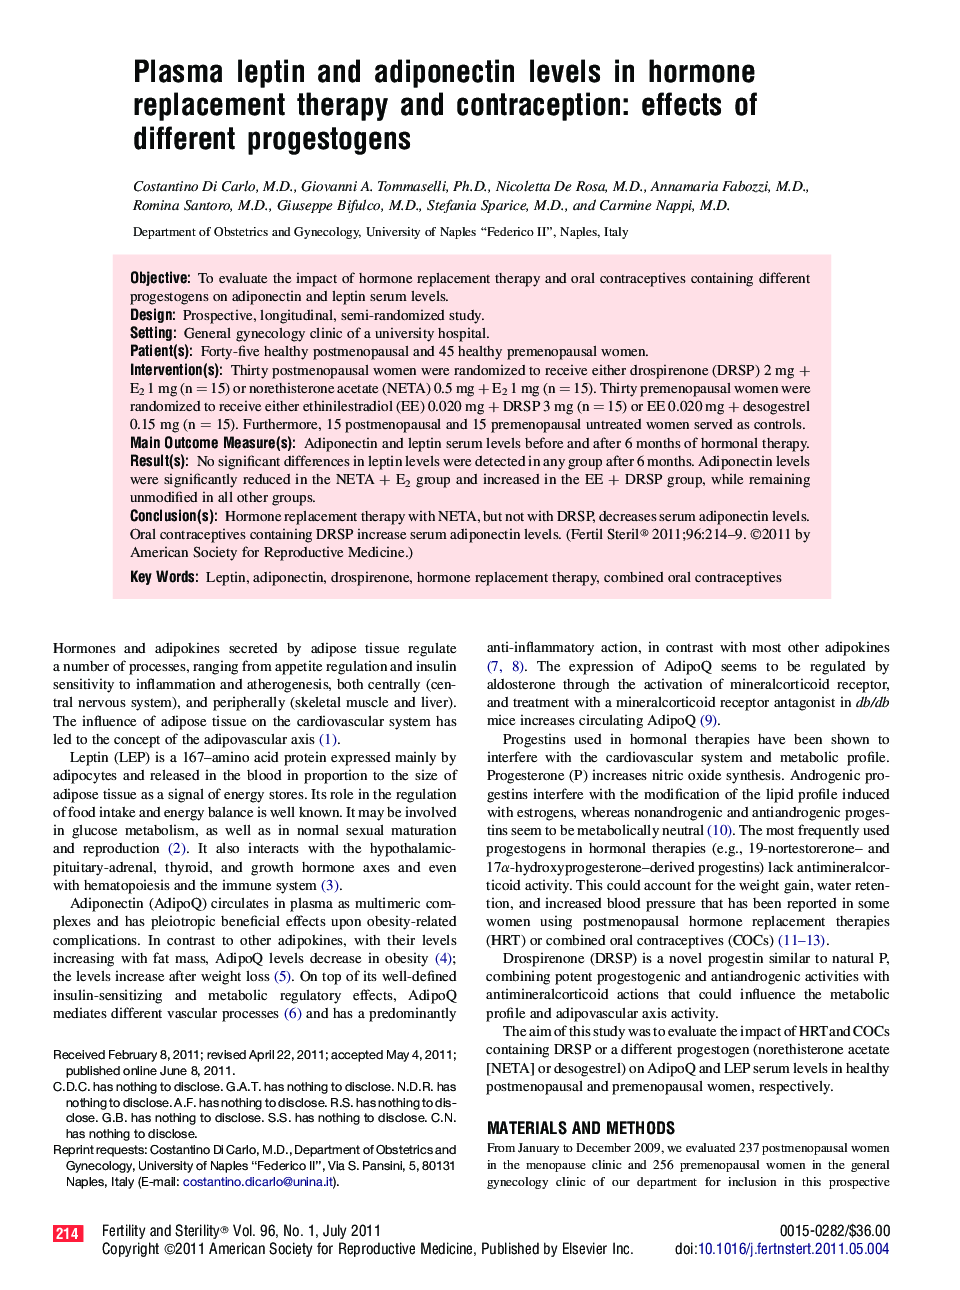 Plasma leptin and adiponectin levels in hormone replacement therapy and contraception: effects of different progestogens 